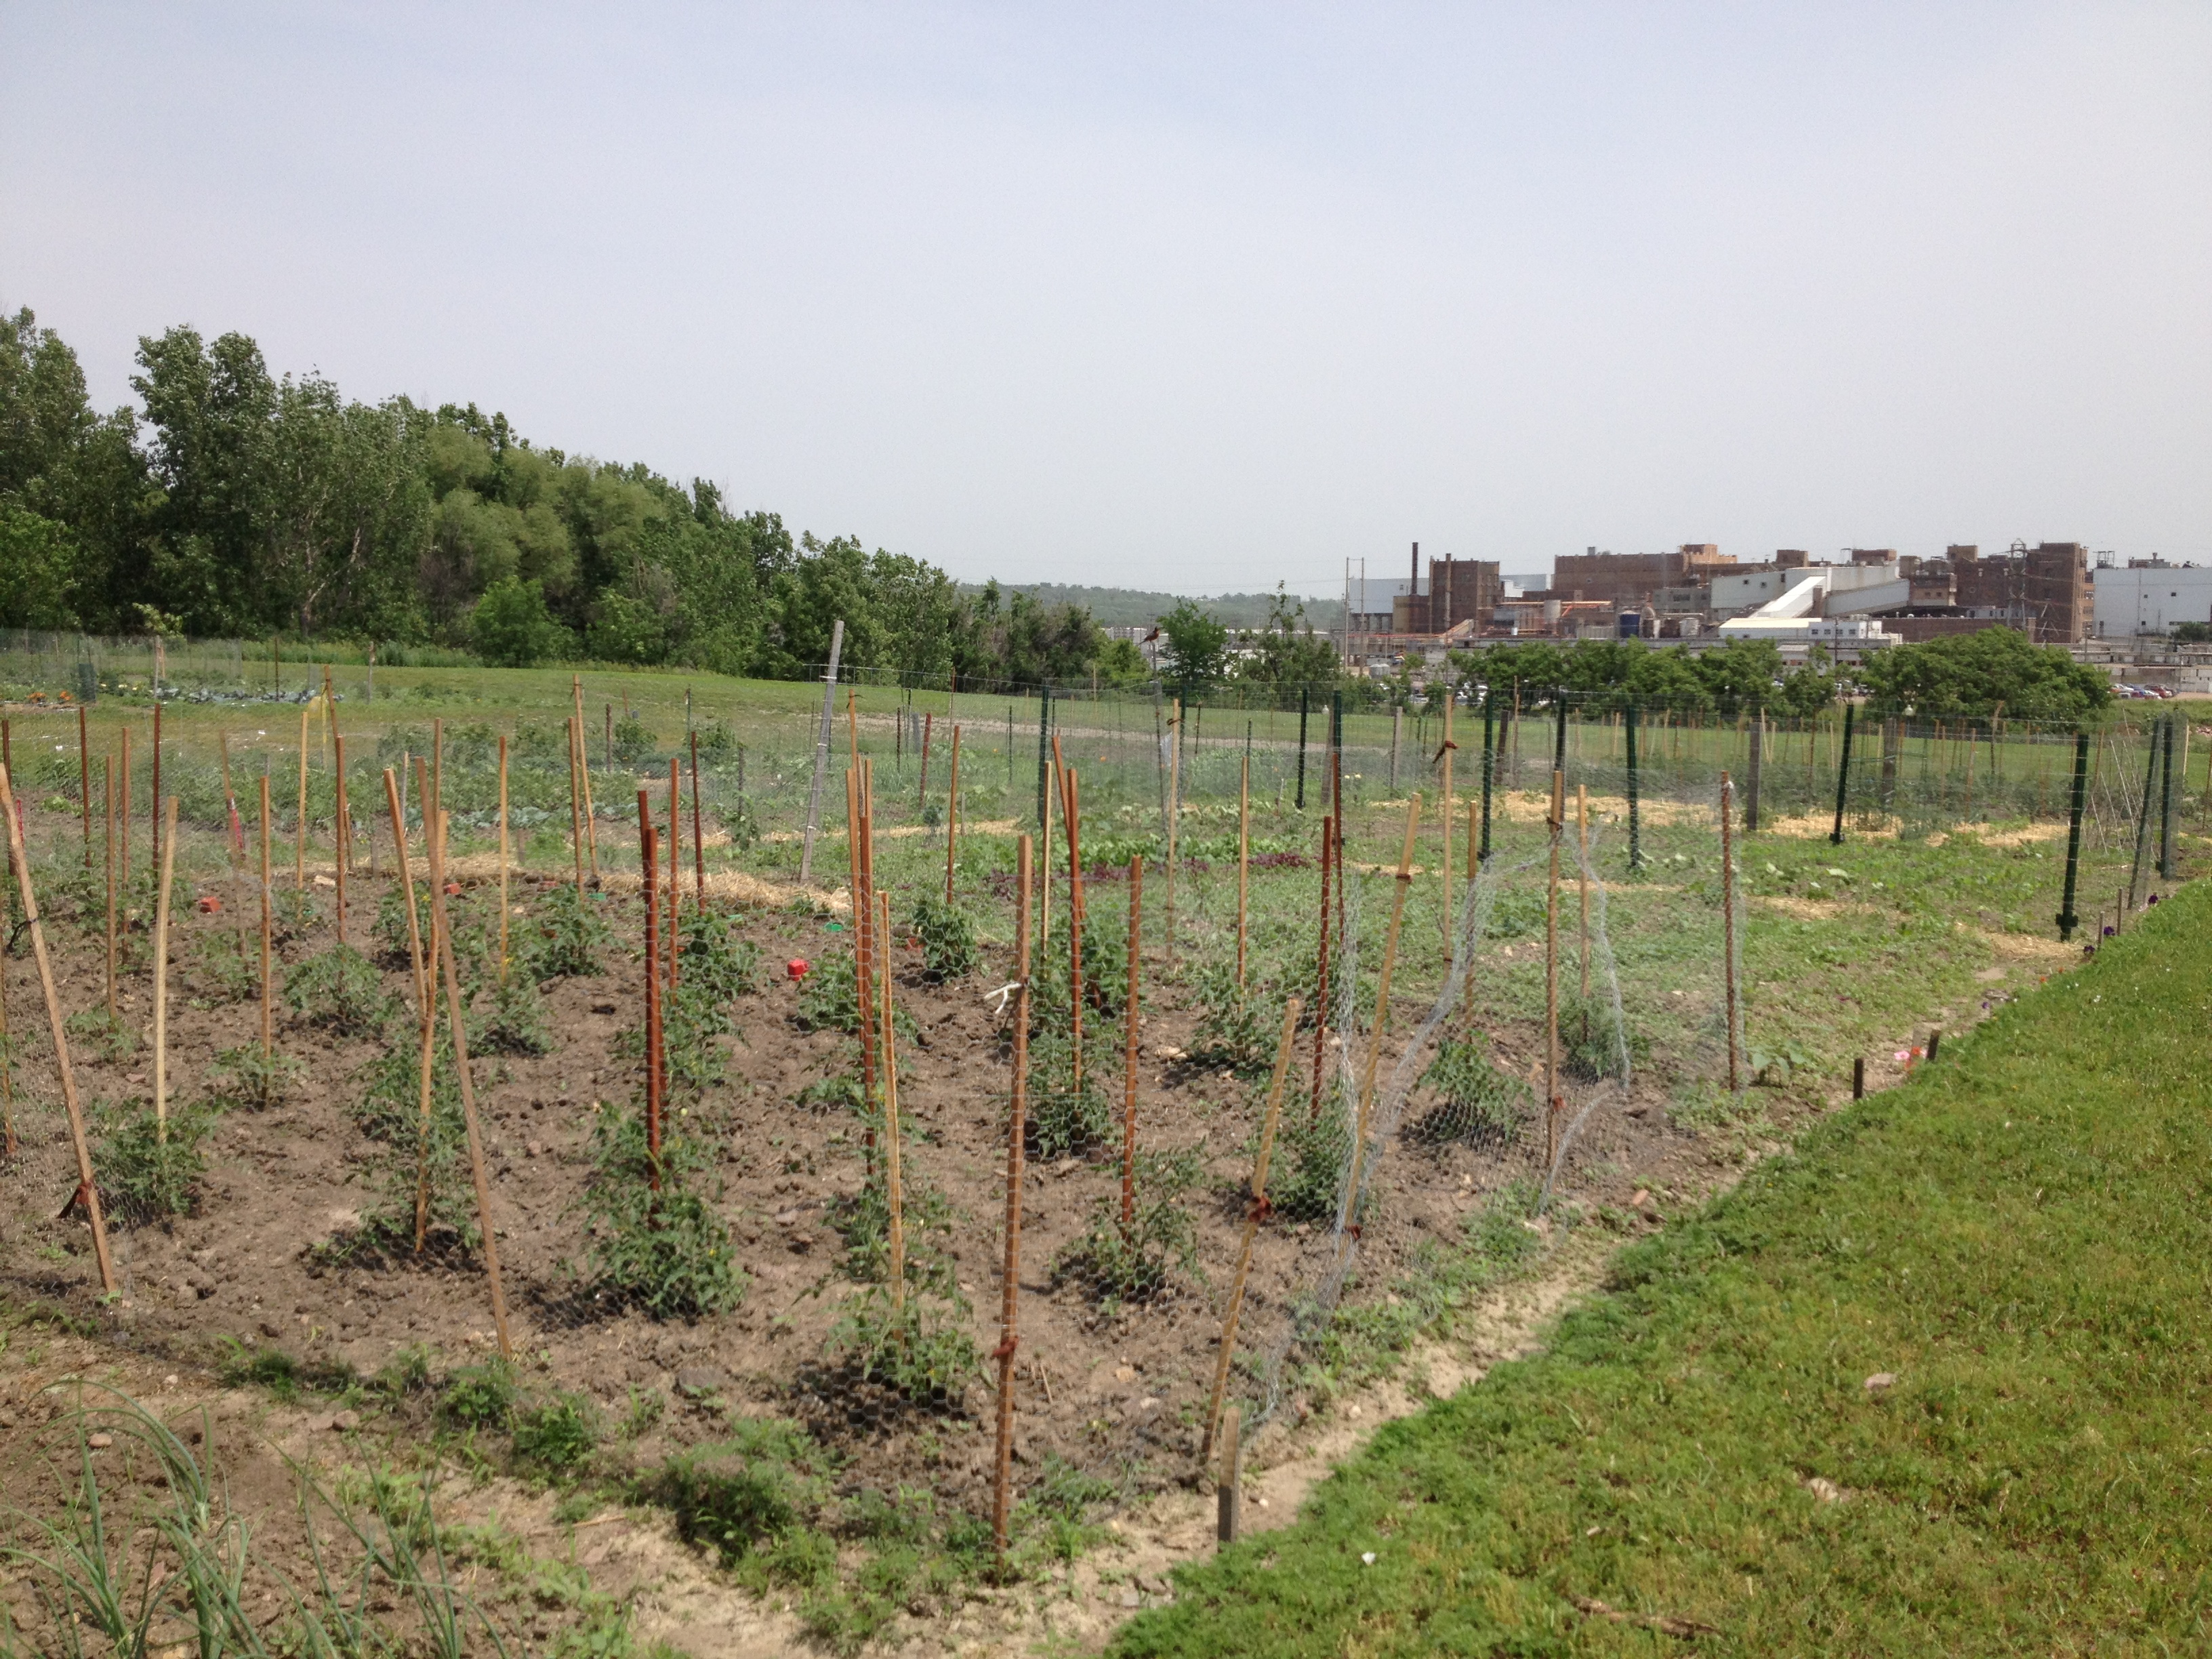 A community garden plot with several tomato plants growing.